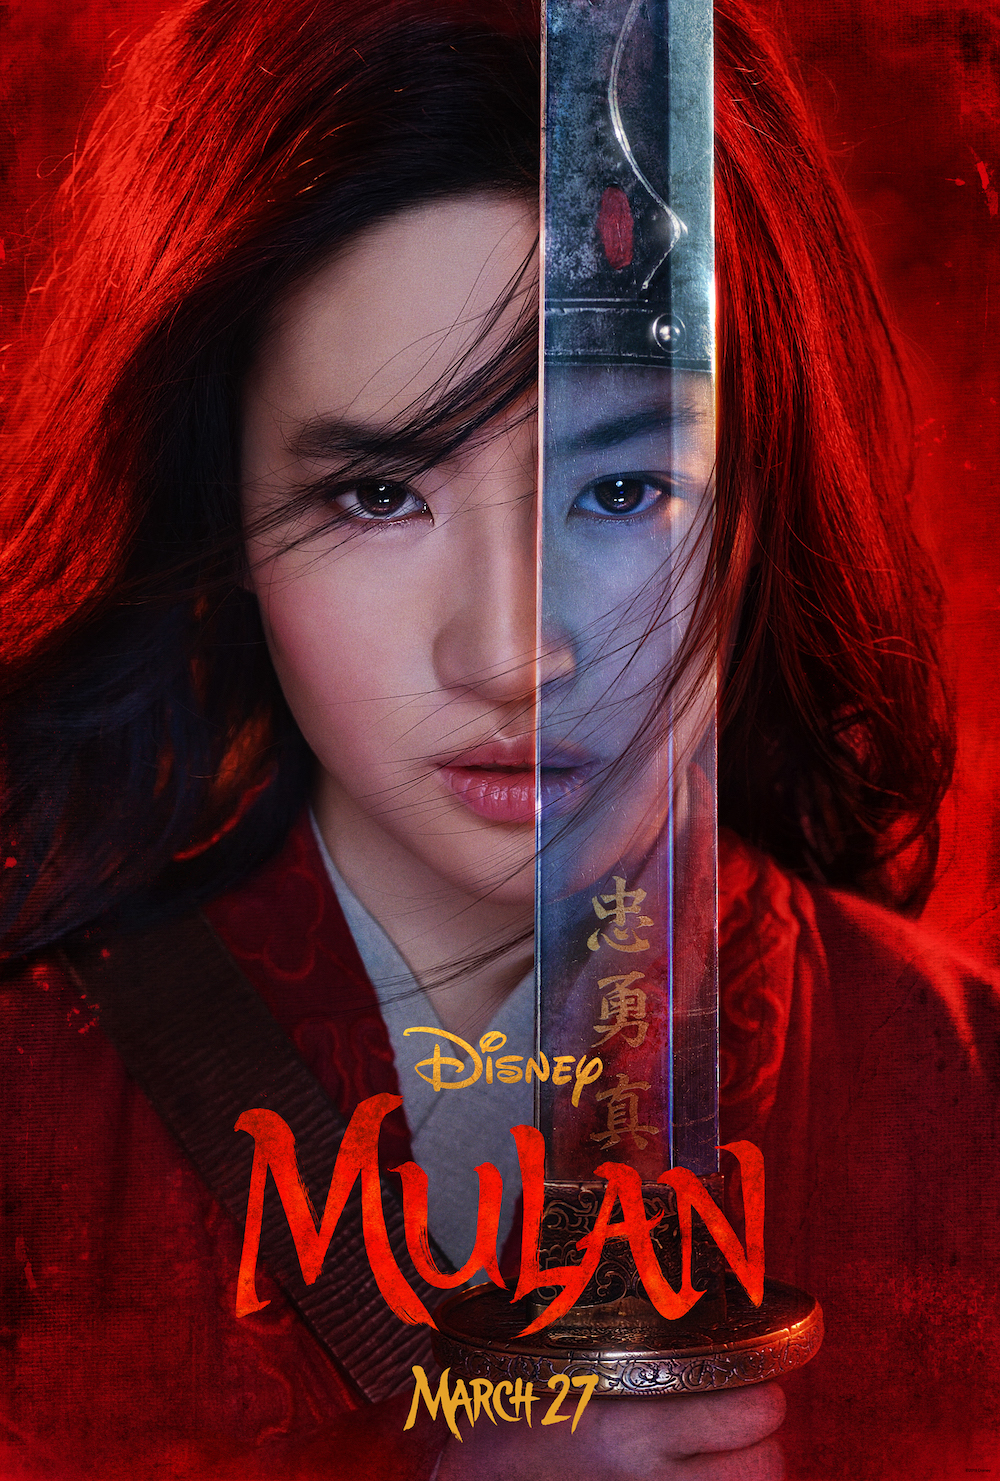 The new 'Mulan' film will be a more direct adaptation of the original legend. — Picture courtesy of Disney